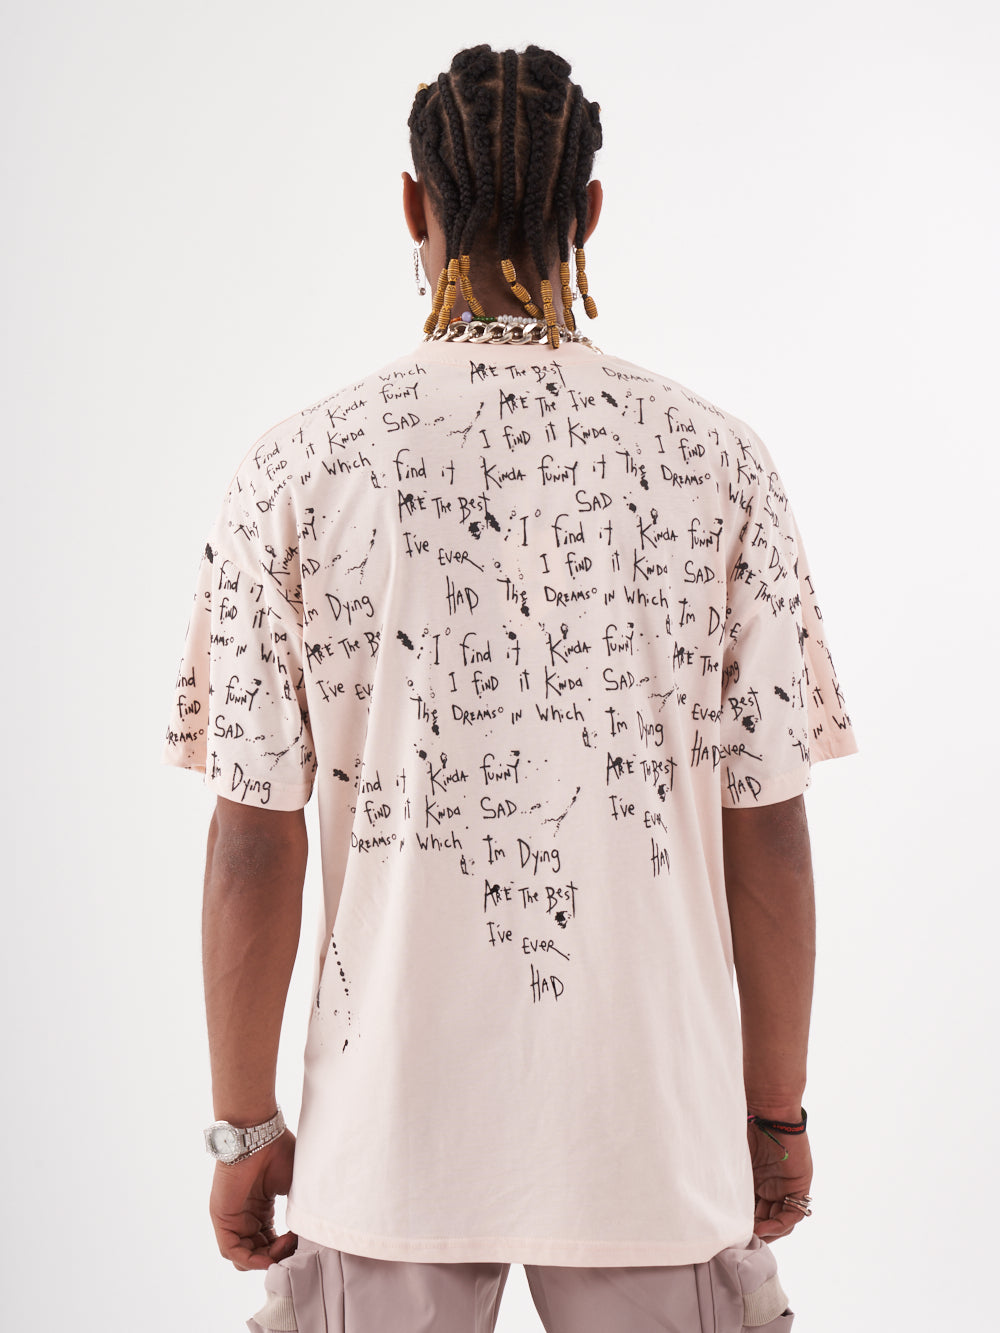 The back view of a man wearing a THINKER T-SHIRT with writing on it.